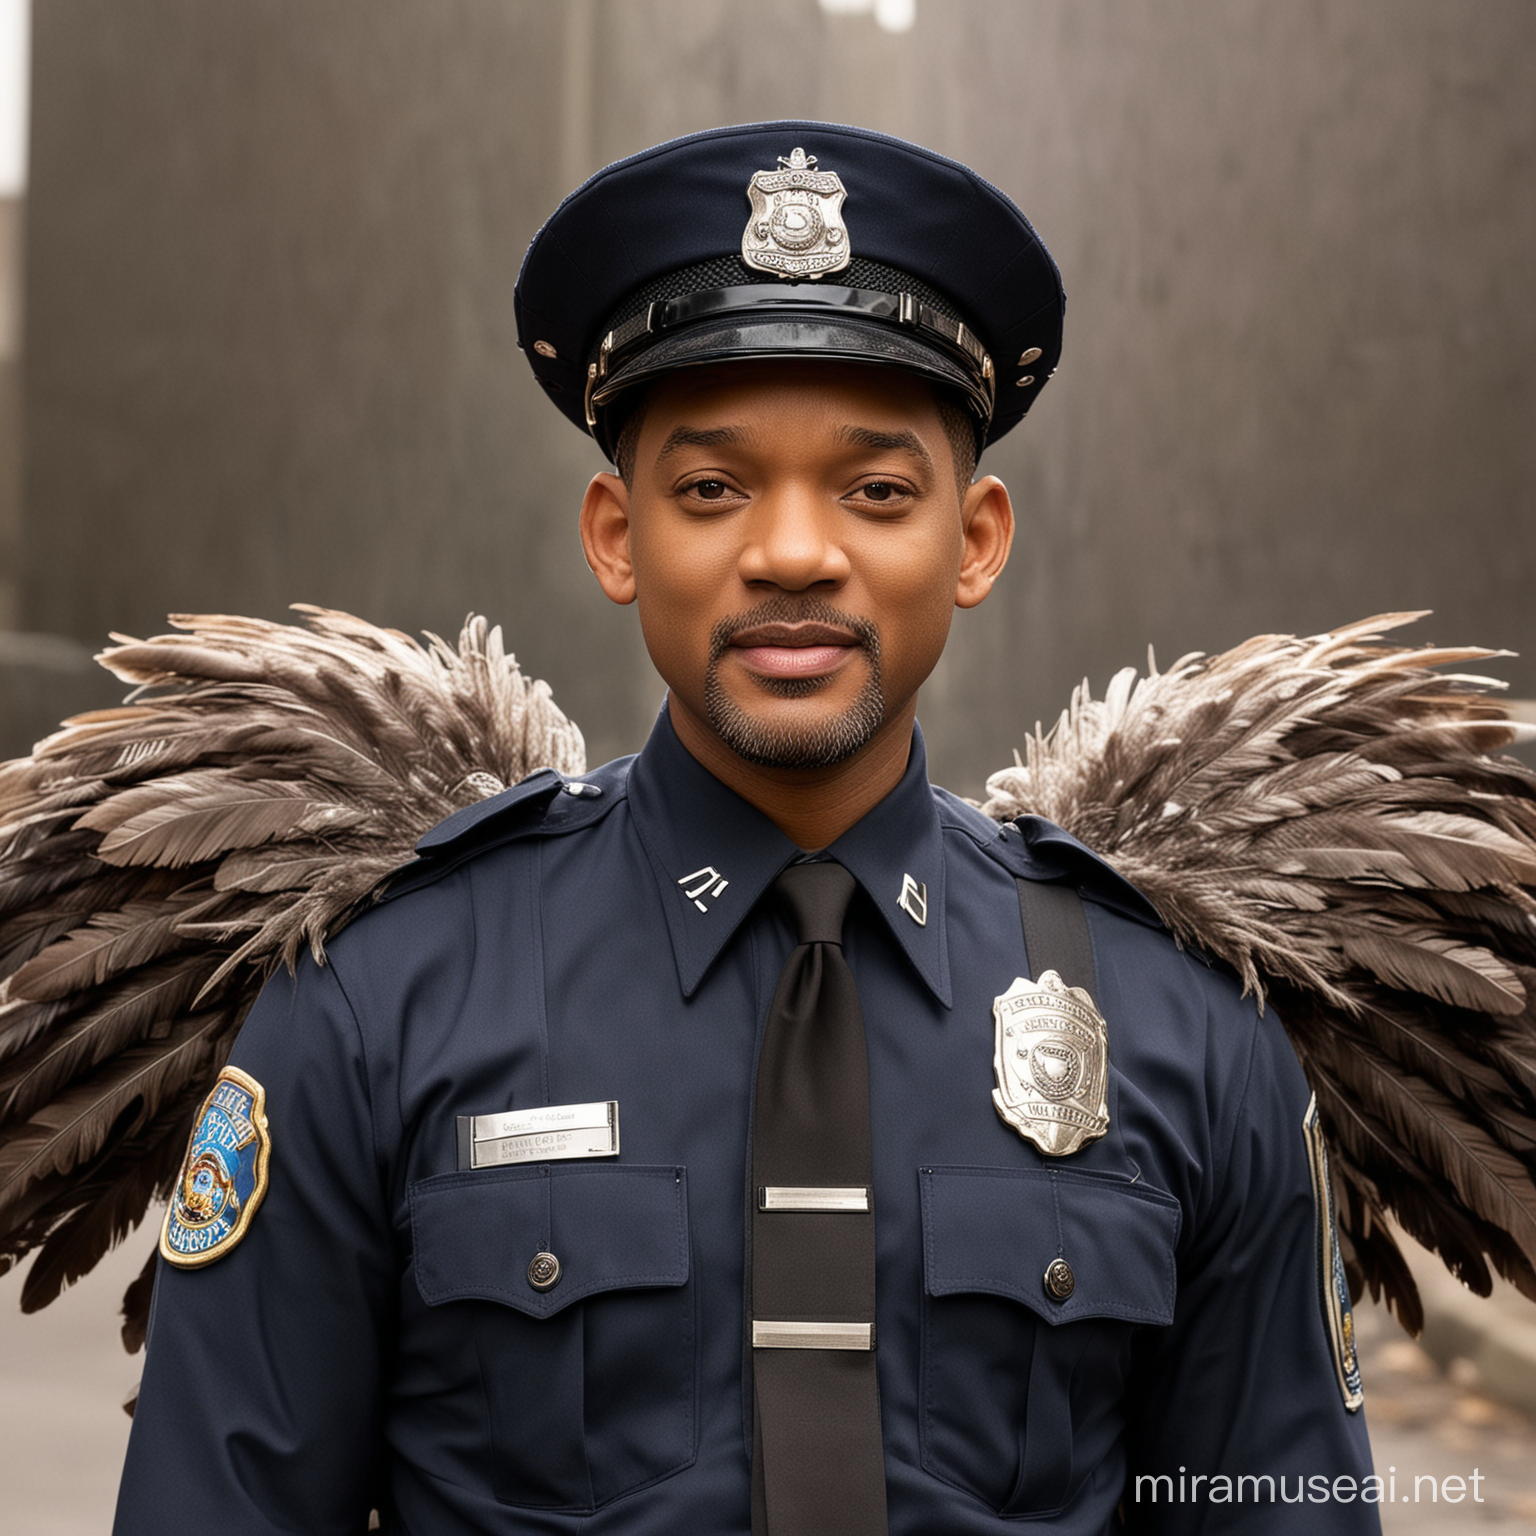 Will Smith dressed as a police officer, he has large feathers extending up from his back side